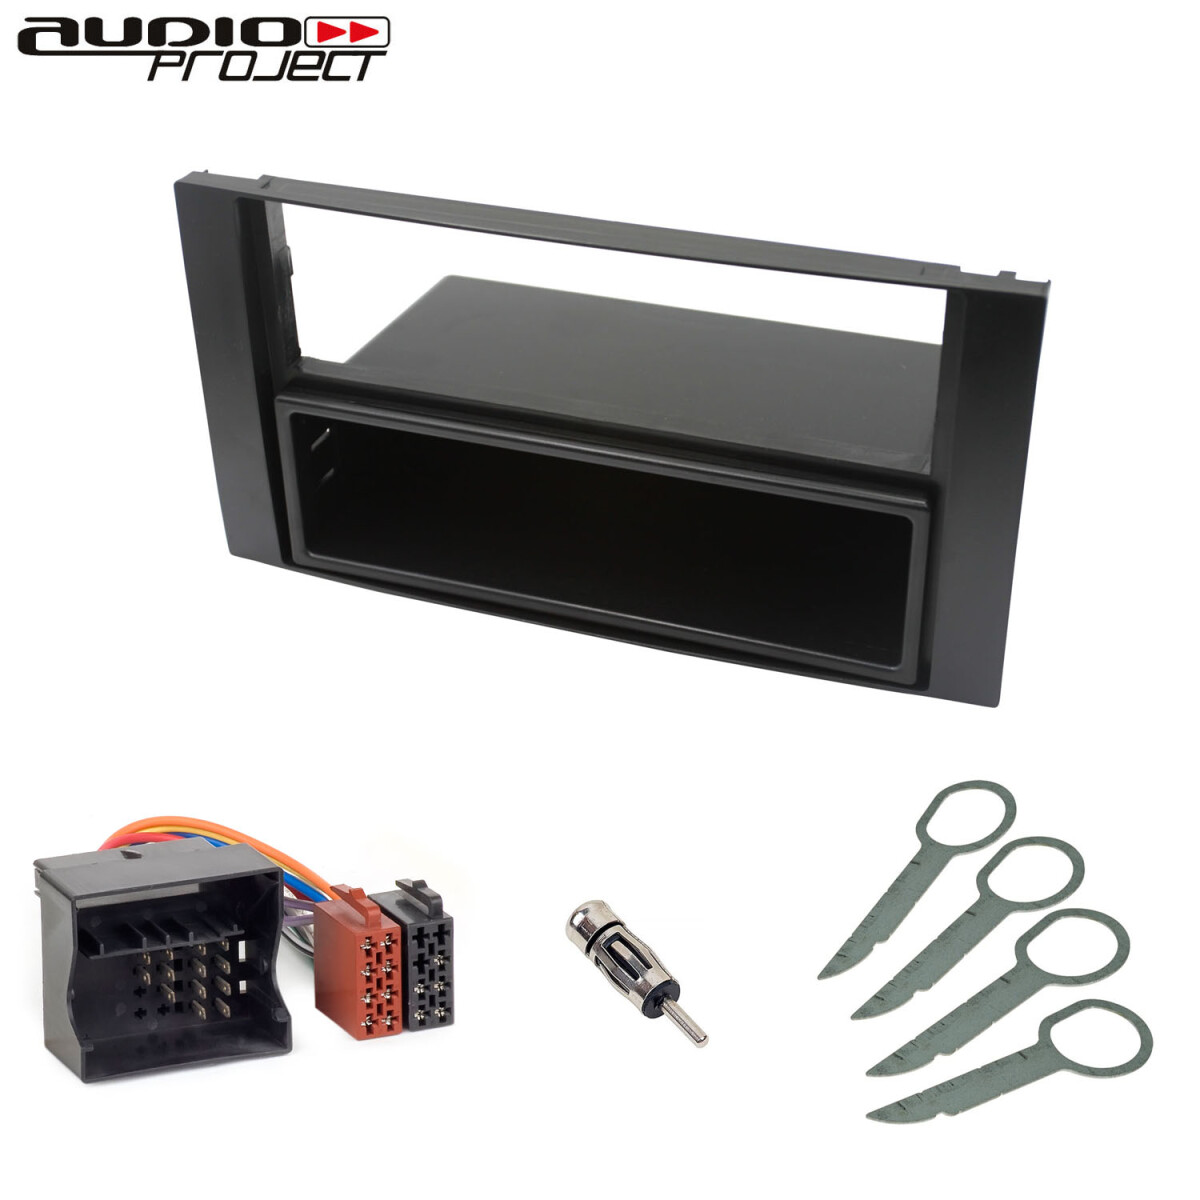 Audioproject A160 Radioblende SET für FORD Focus 2 C-Max Transit Fies,  22,98 €